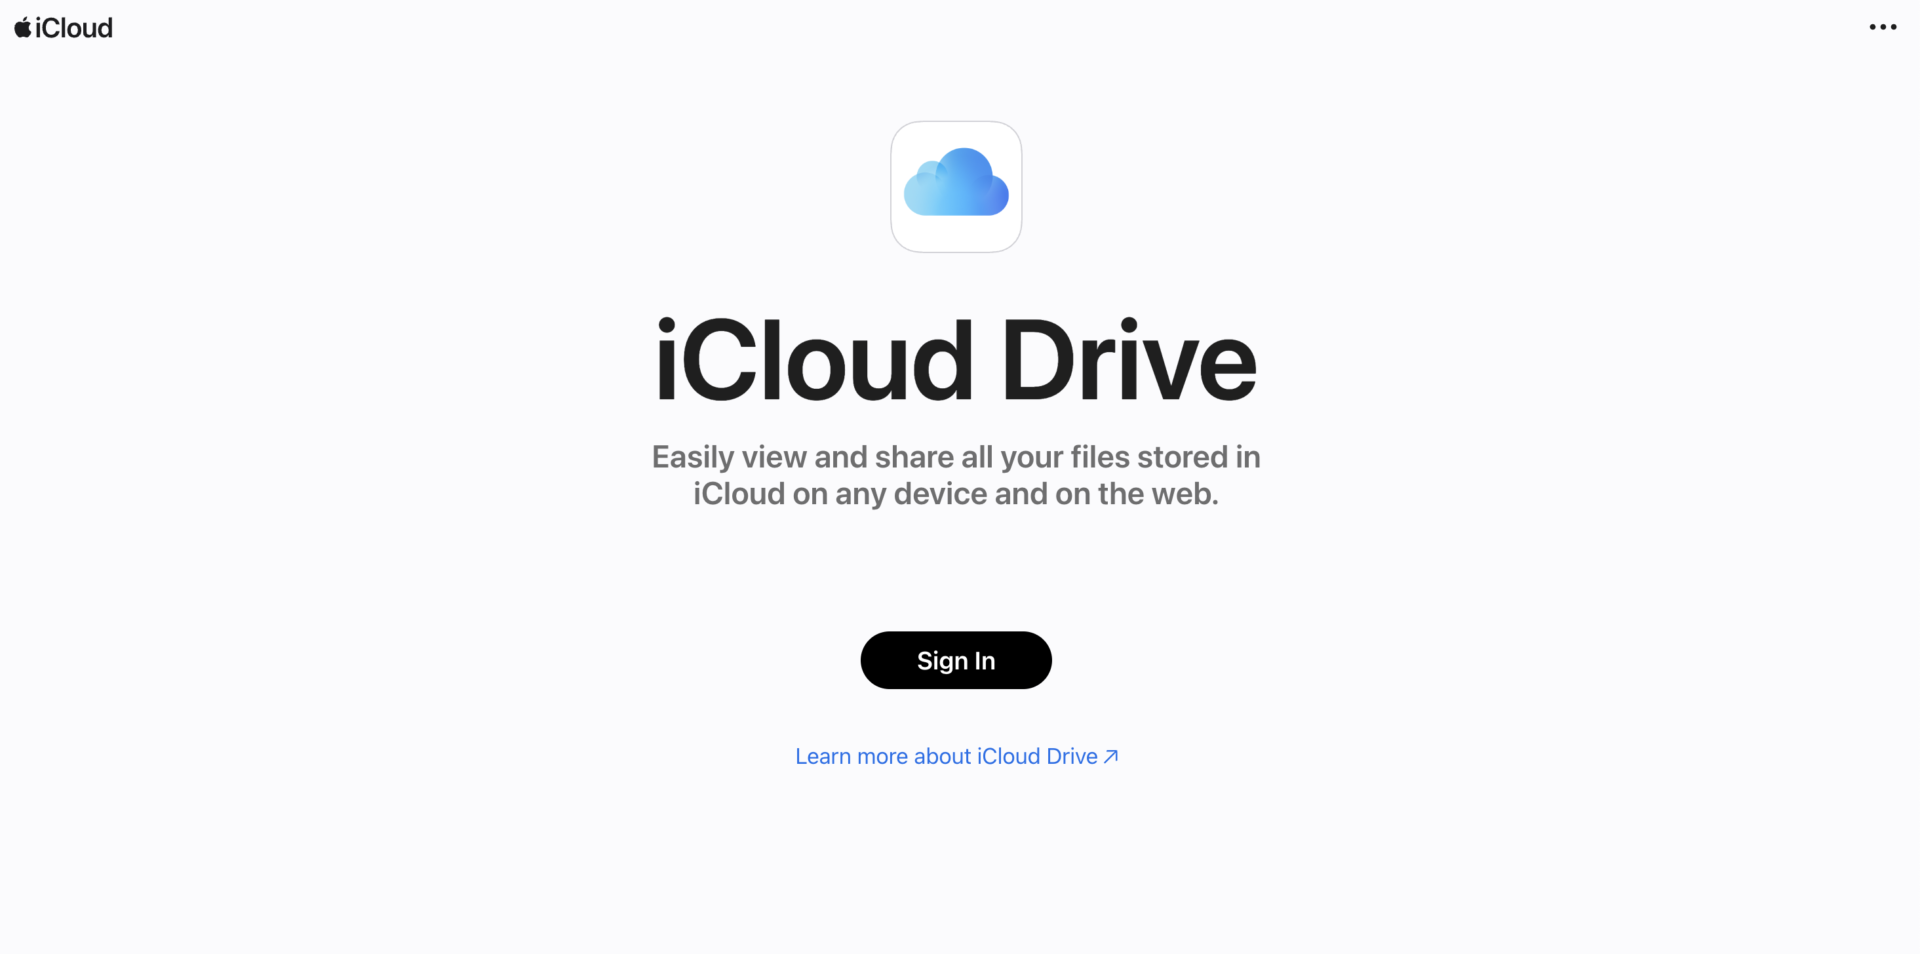 Top page of iCloud Drive